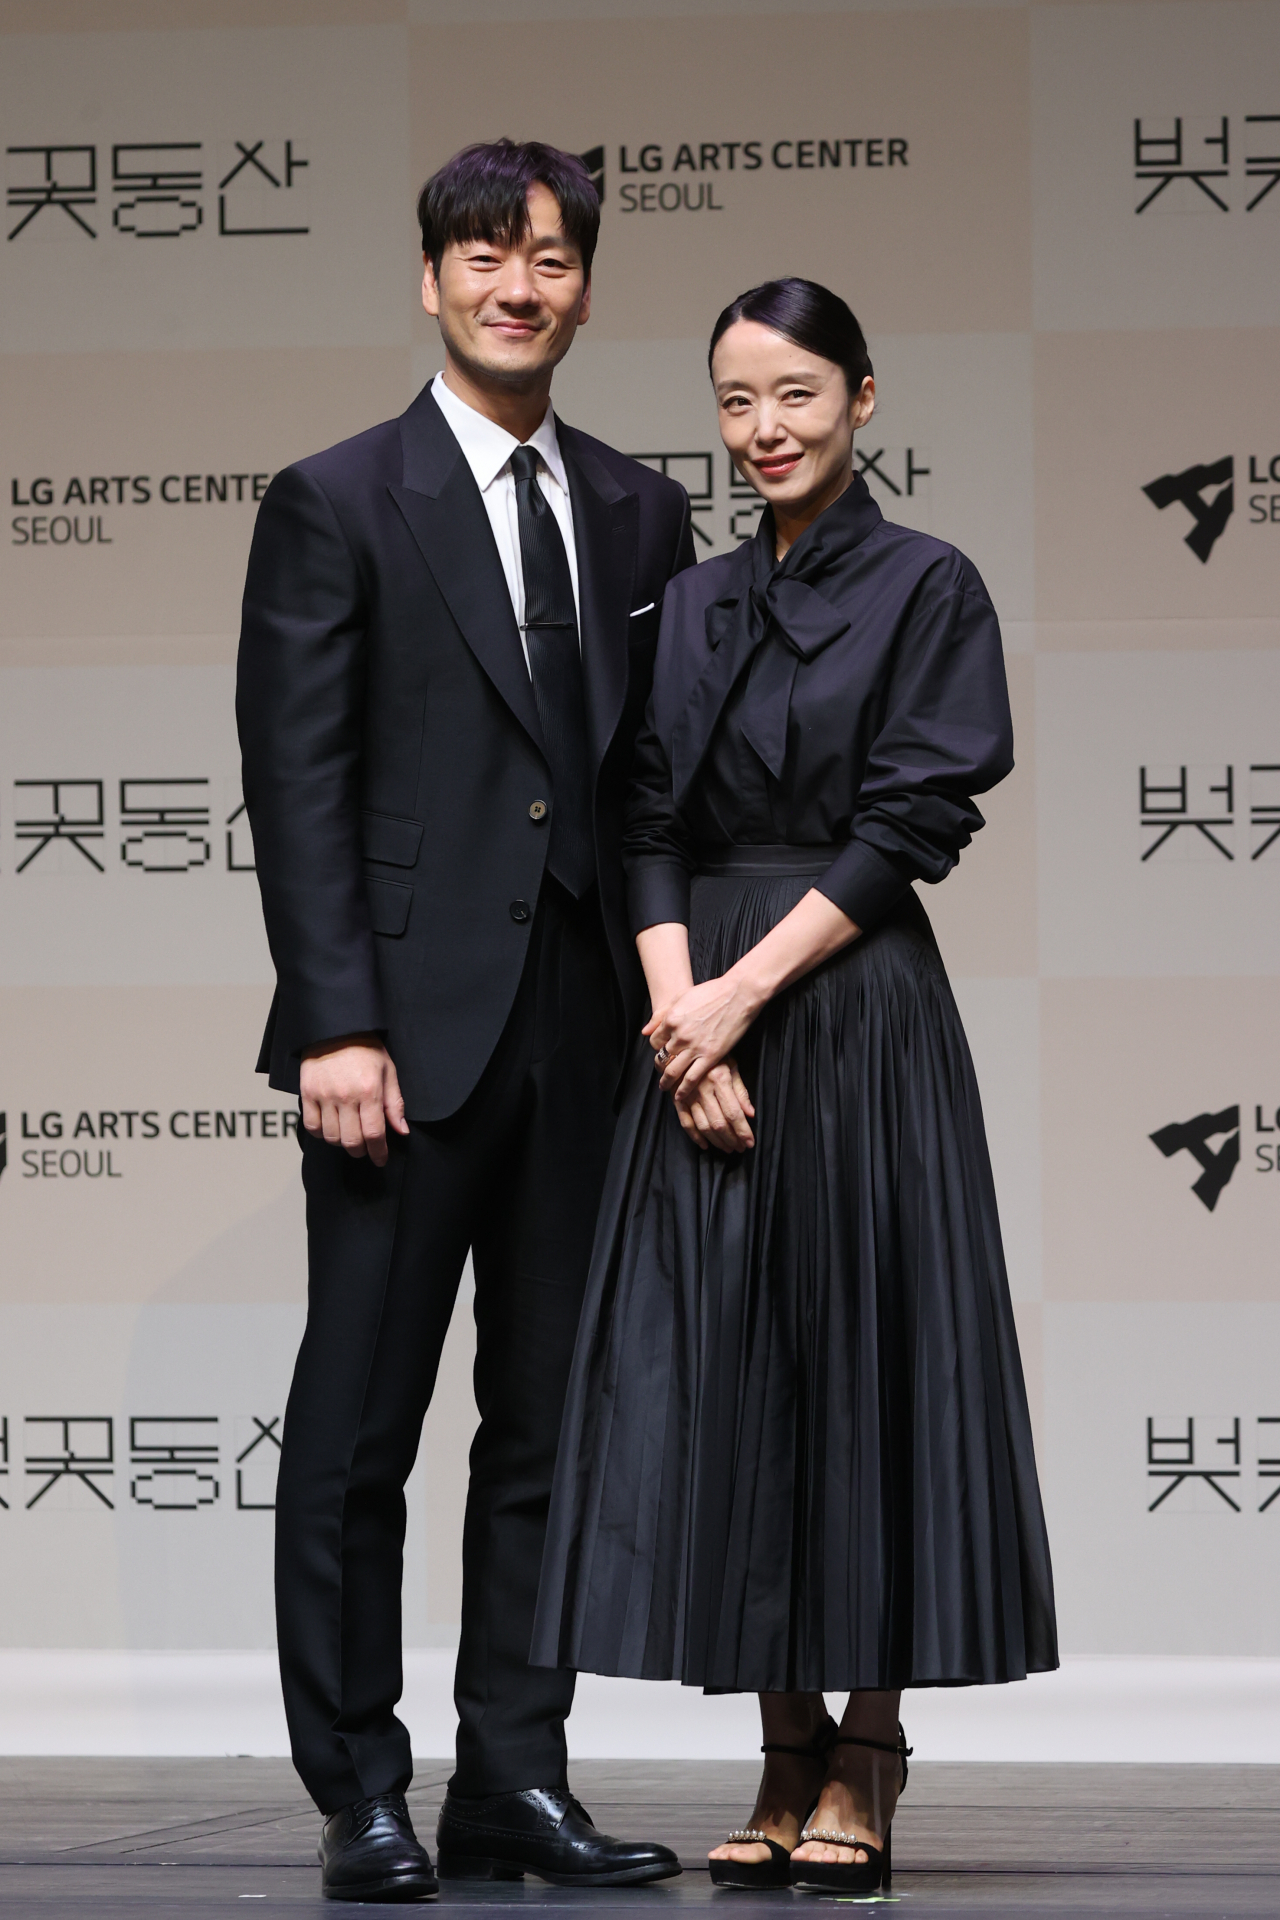 Jeon Do-yeon (right) and Park Hae-soo pose for photos during a press conference at the LG Arts Center in Seoul, April 23. (Yonhap)